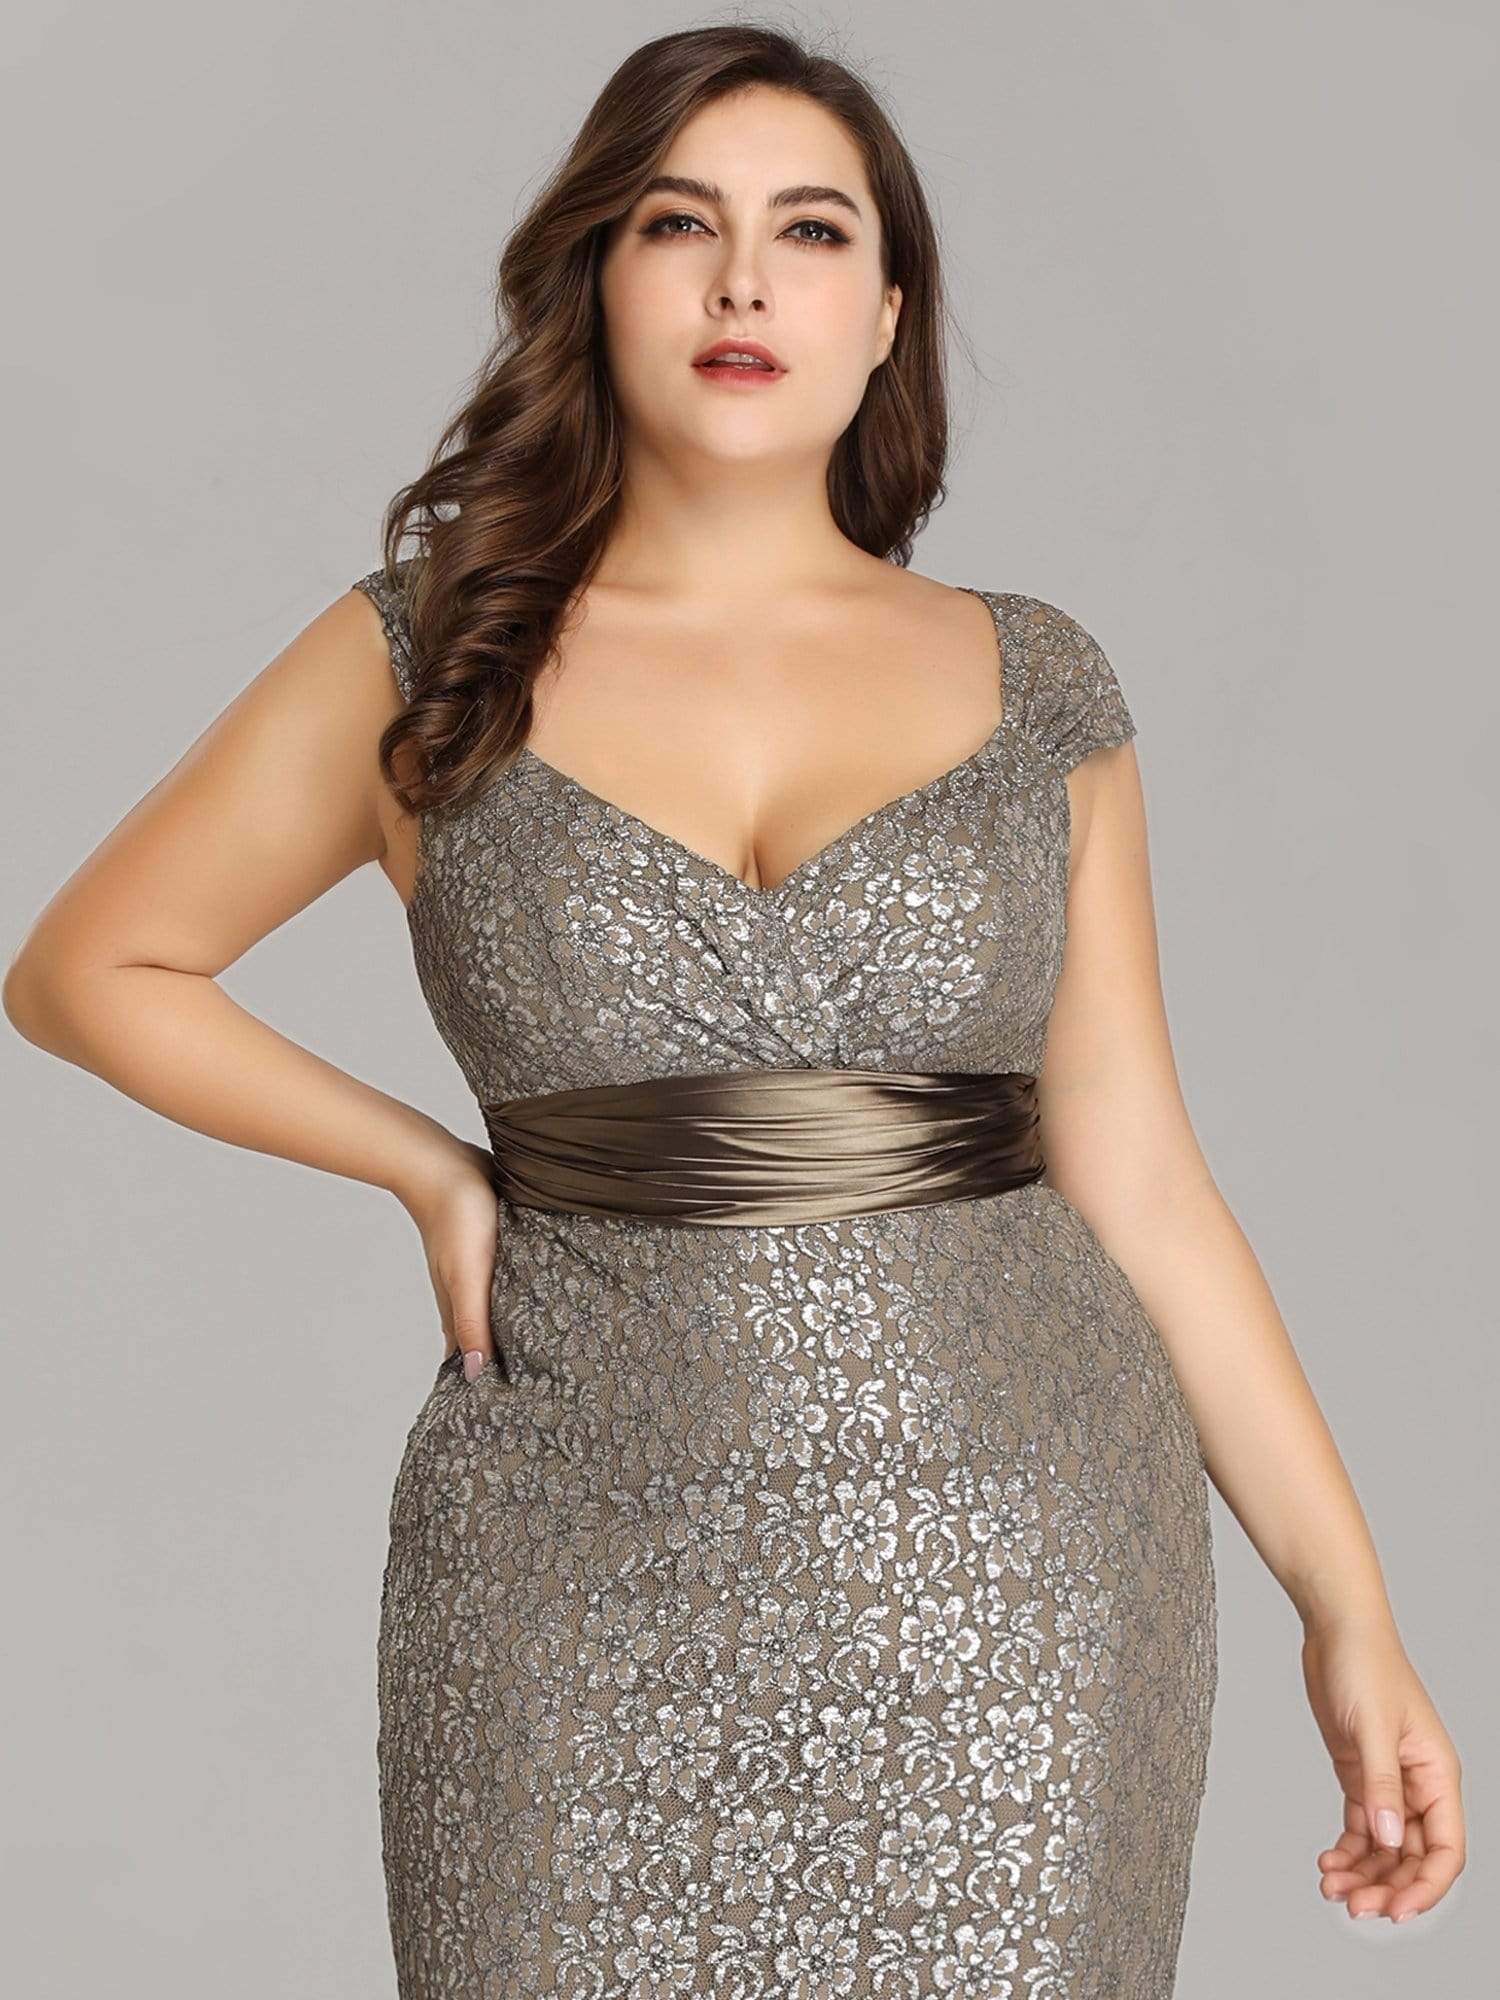 Plus Size Fishtail Evening Party Dresses for Women with Cap Sleeve